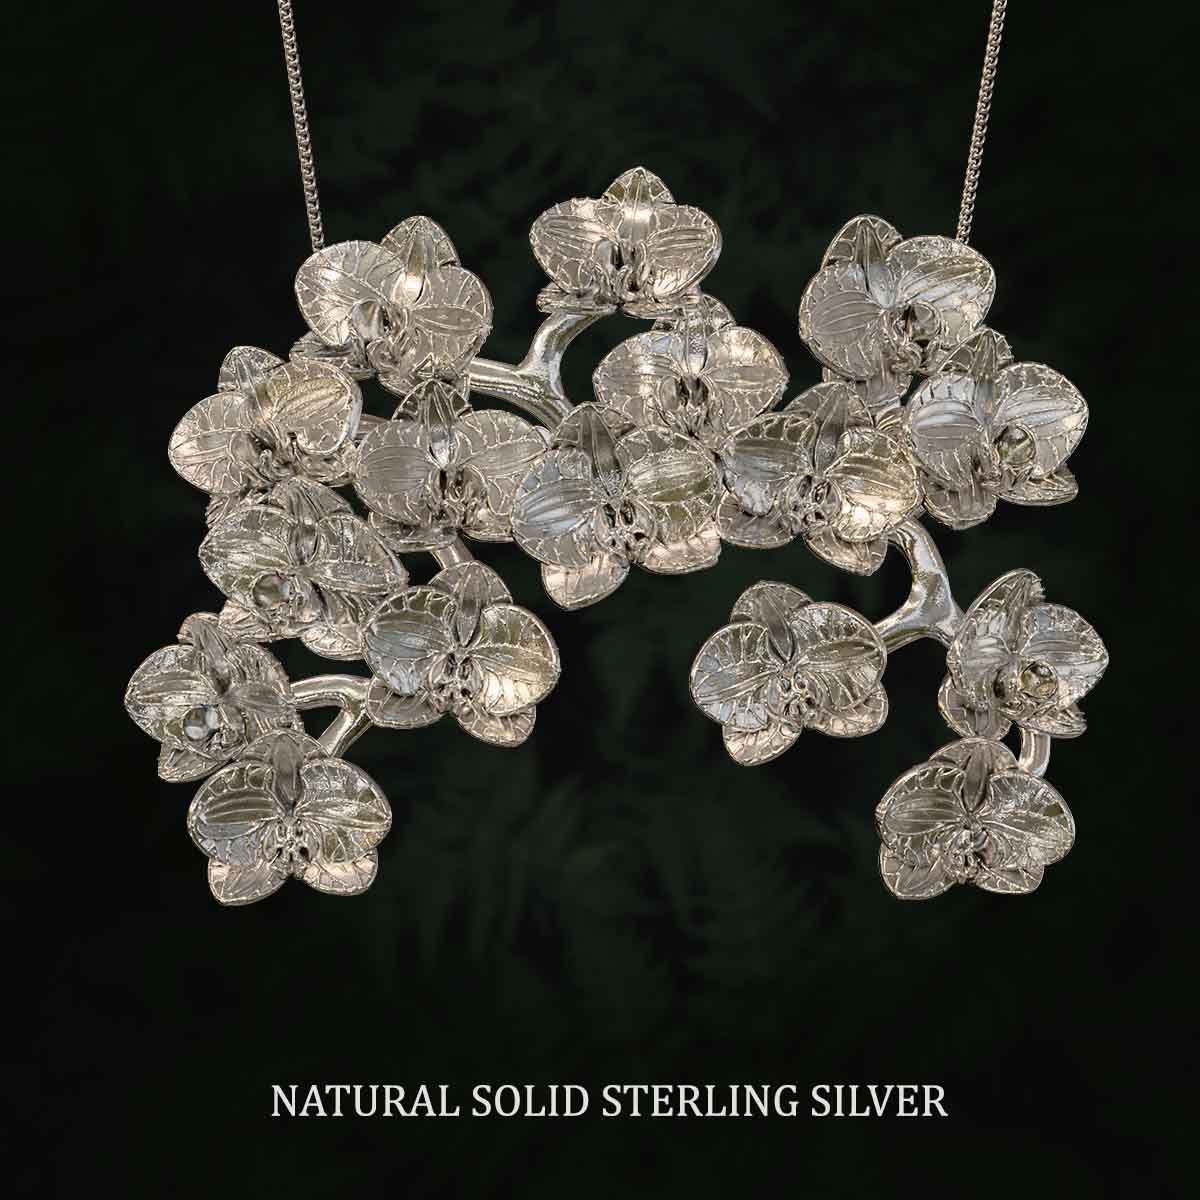 Natural-Satin-Polish-Solid-Sterling-Silver-Grand-Orchid-Bough-Pendant-Jewelry-For-Necklace